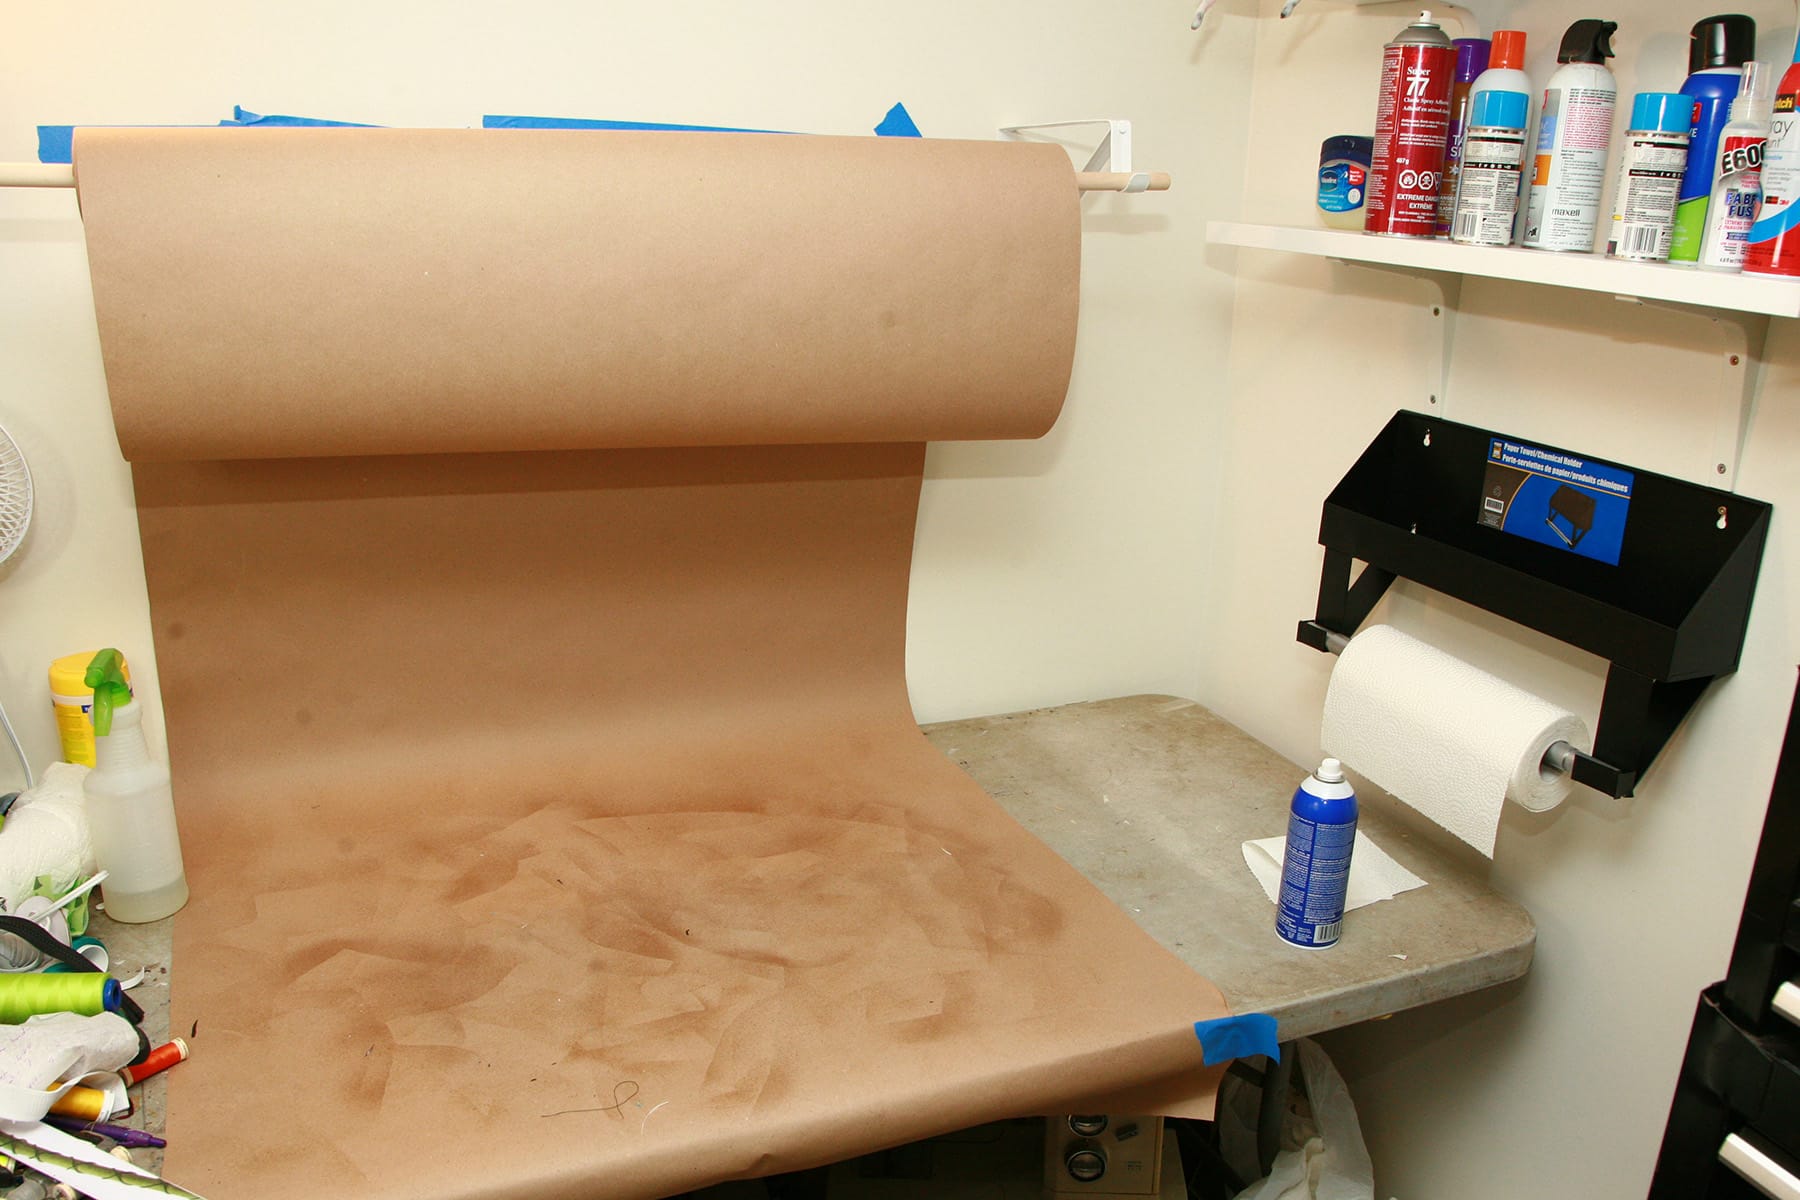 A work table, with a roll of brown craft paper suspended above it. The paper is pulled down and over the table, providing a backdrop for spraying.